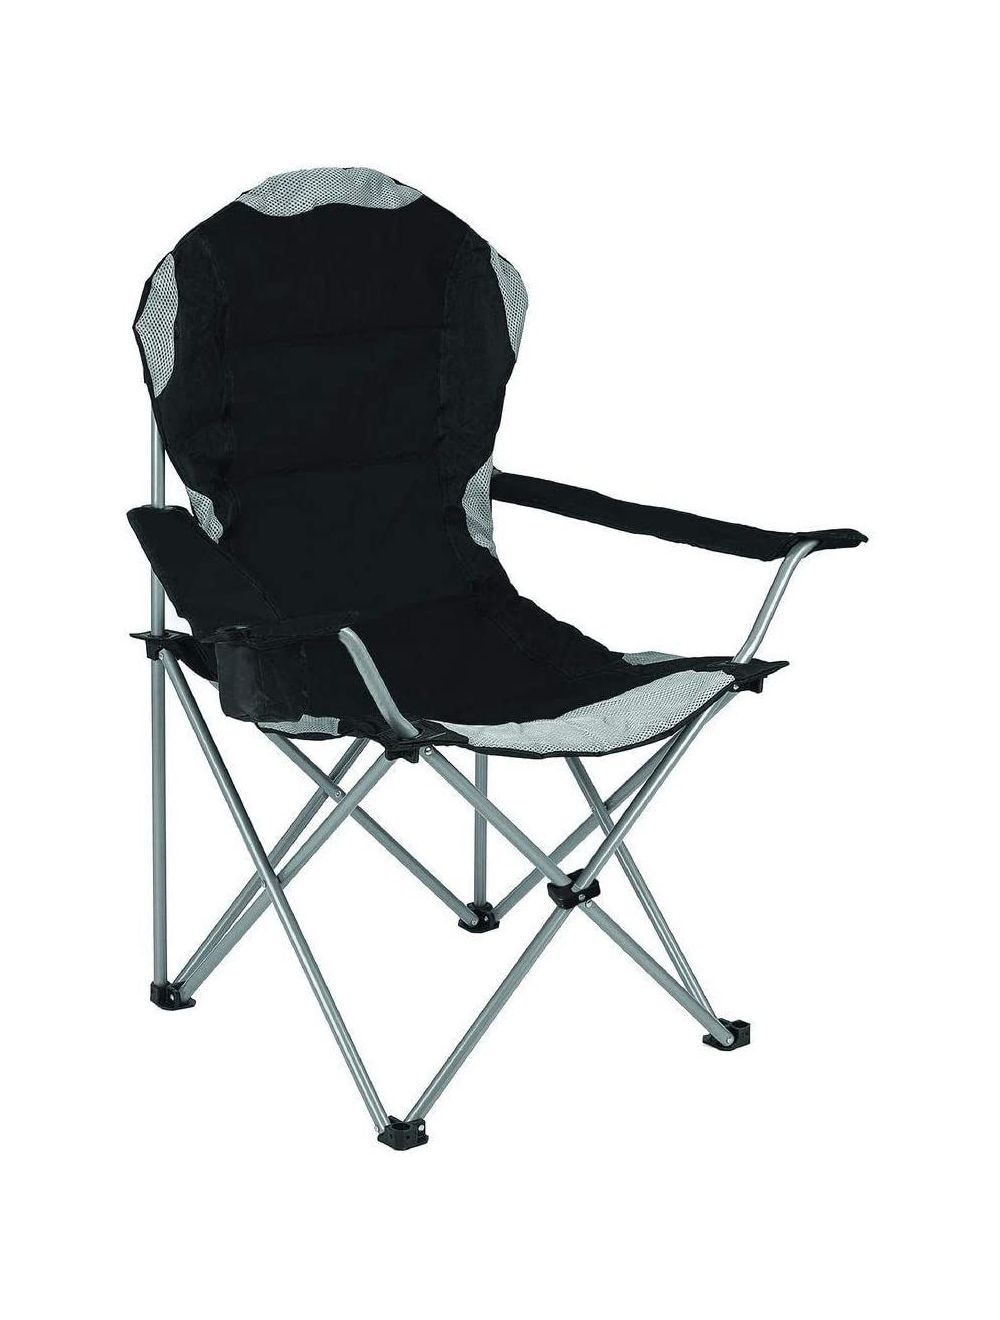 Heavy Duty Luxury Canvas Padded High Backrest with Insulated Cup Holder  Folding Camping Fishing Chair Black